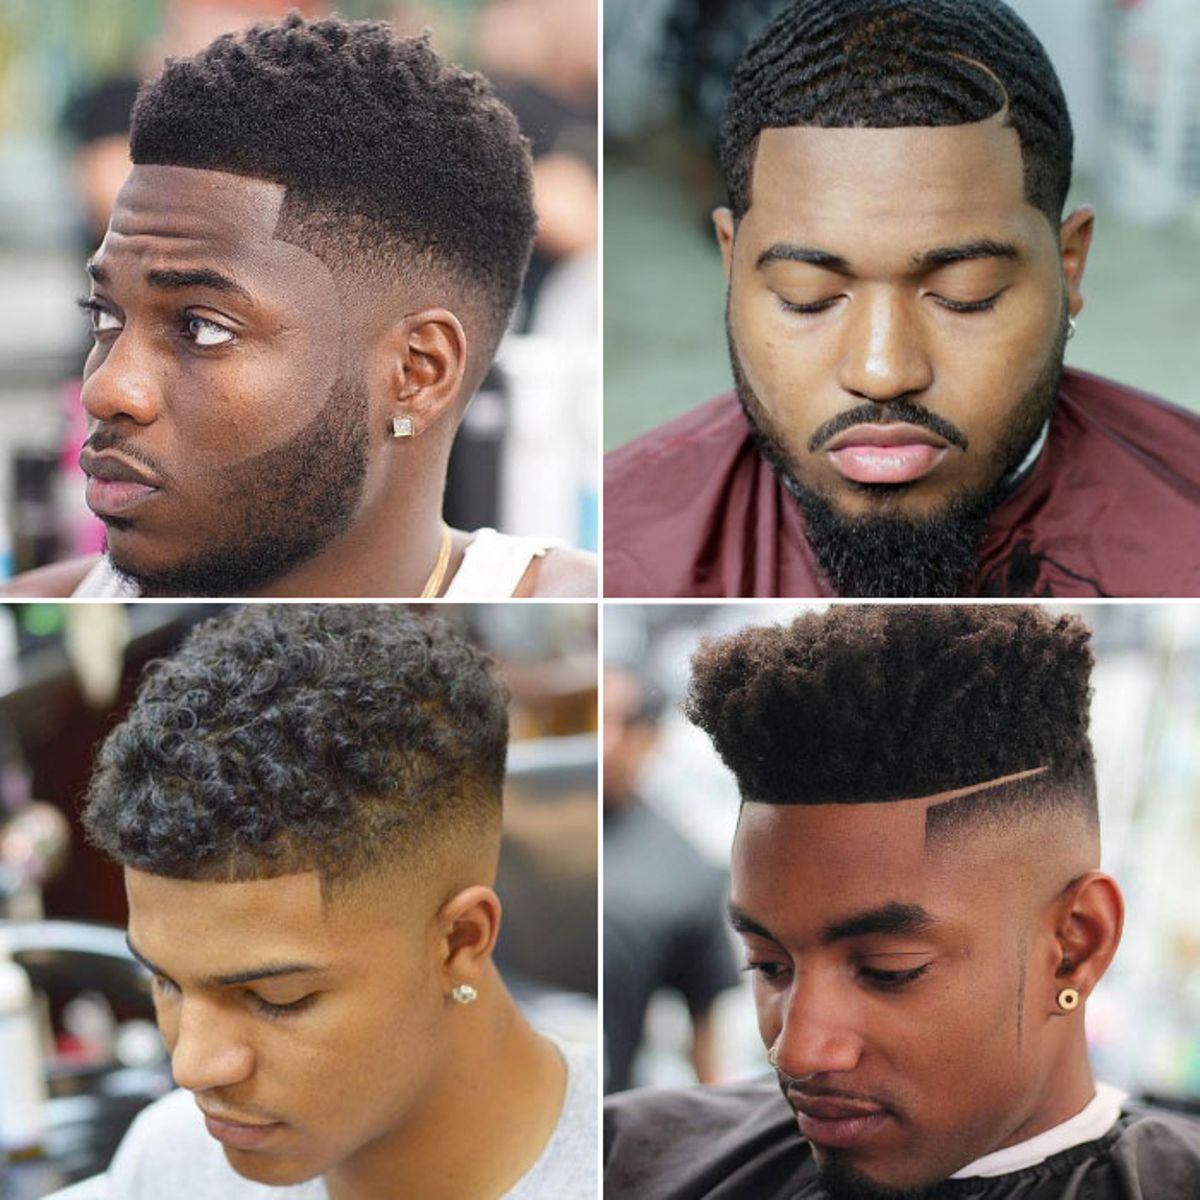 Men: The best hairstyles for your face shape